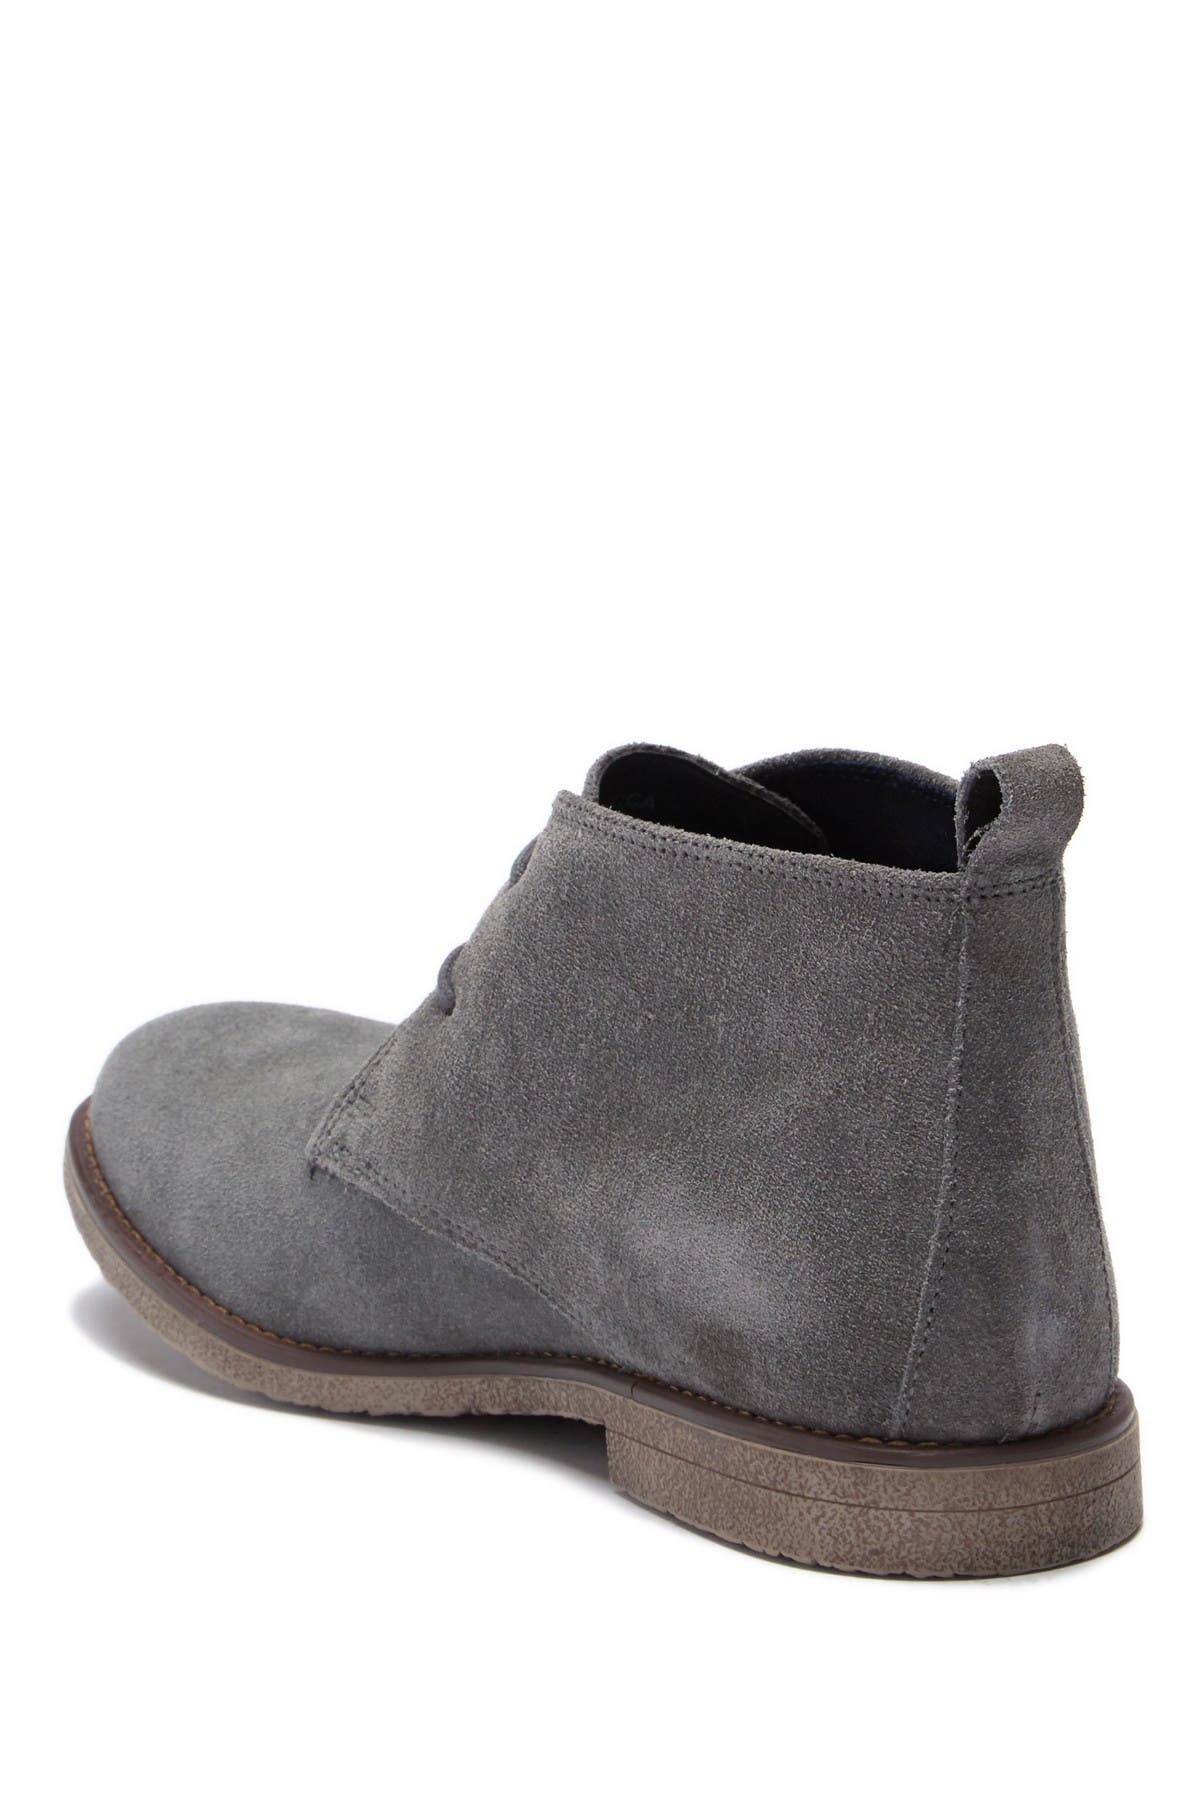 Joseph Abboud | Lucca Suede Chukka Boot 